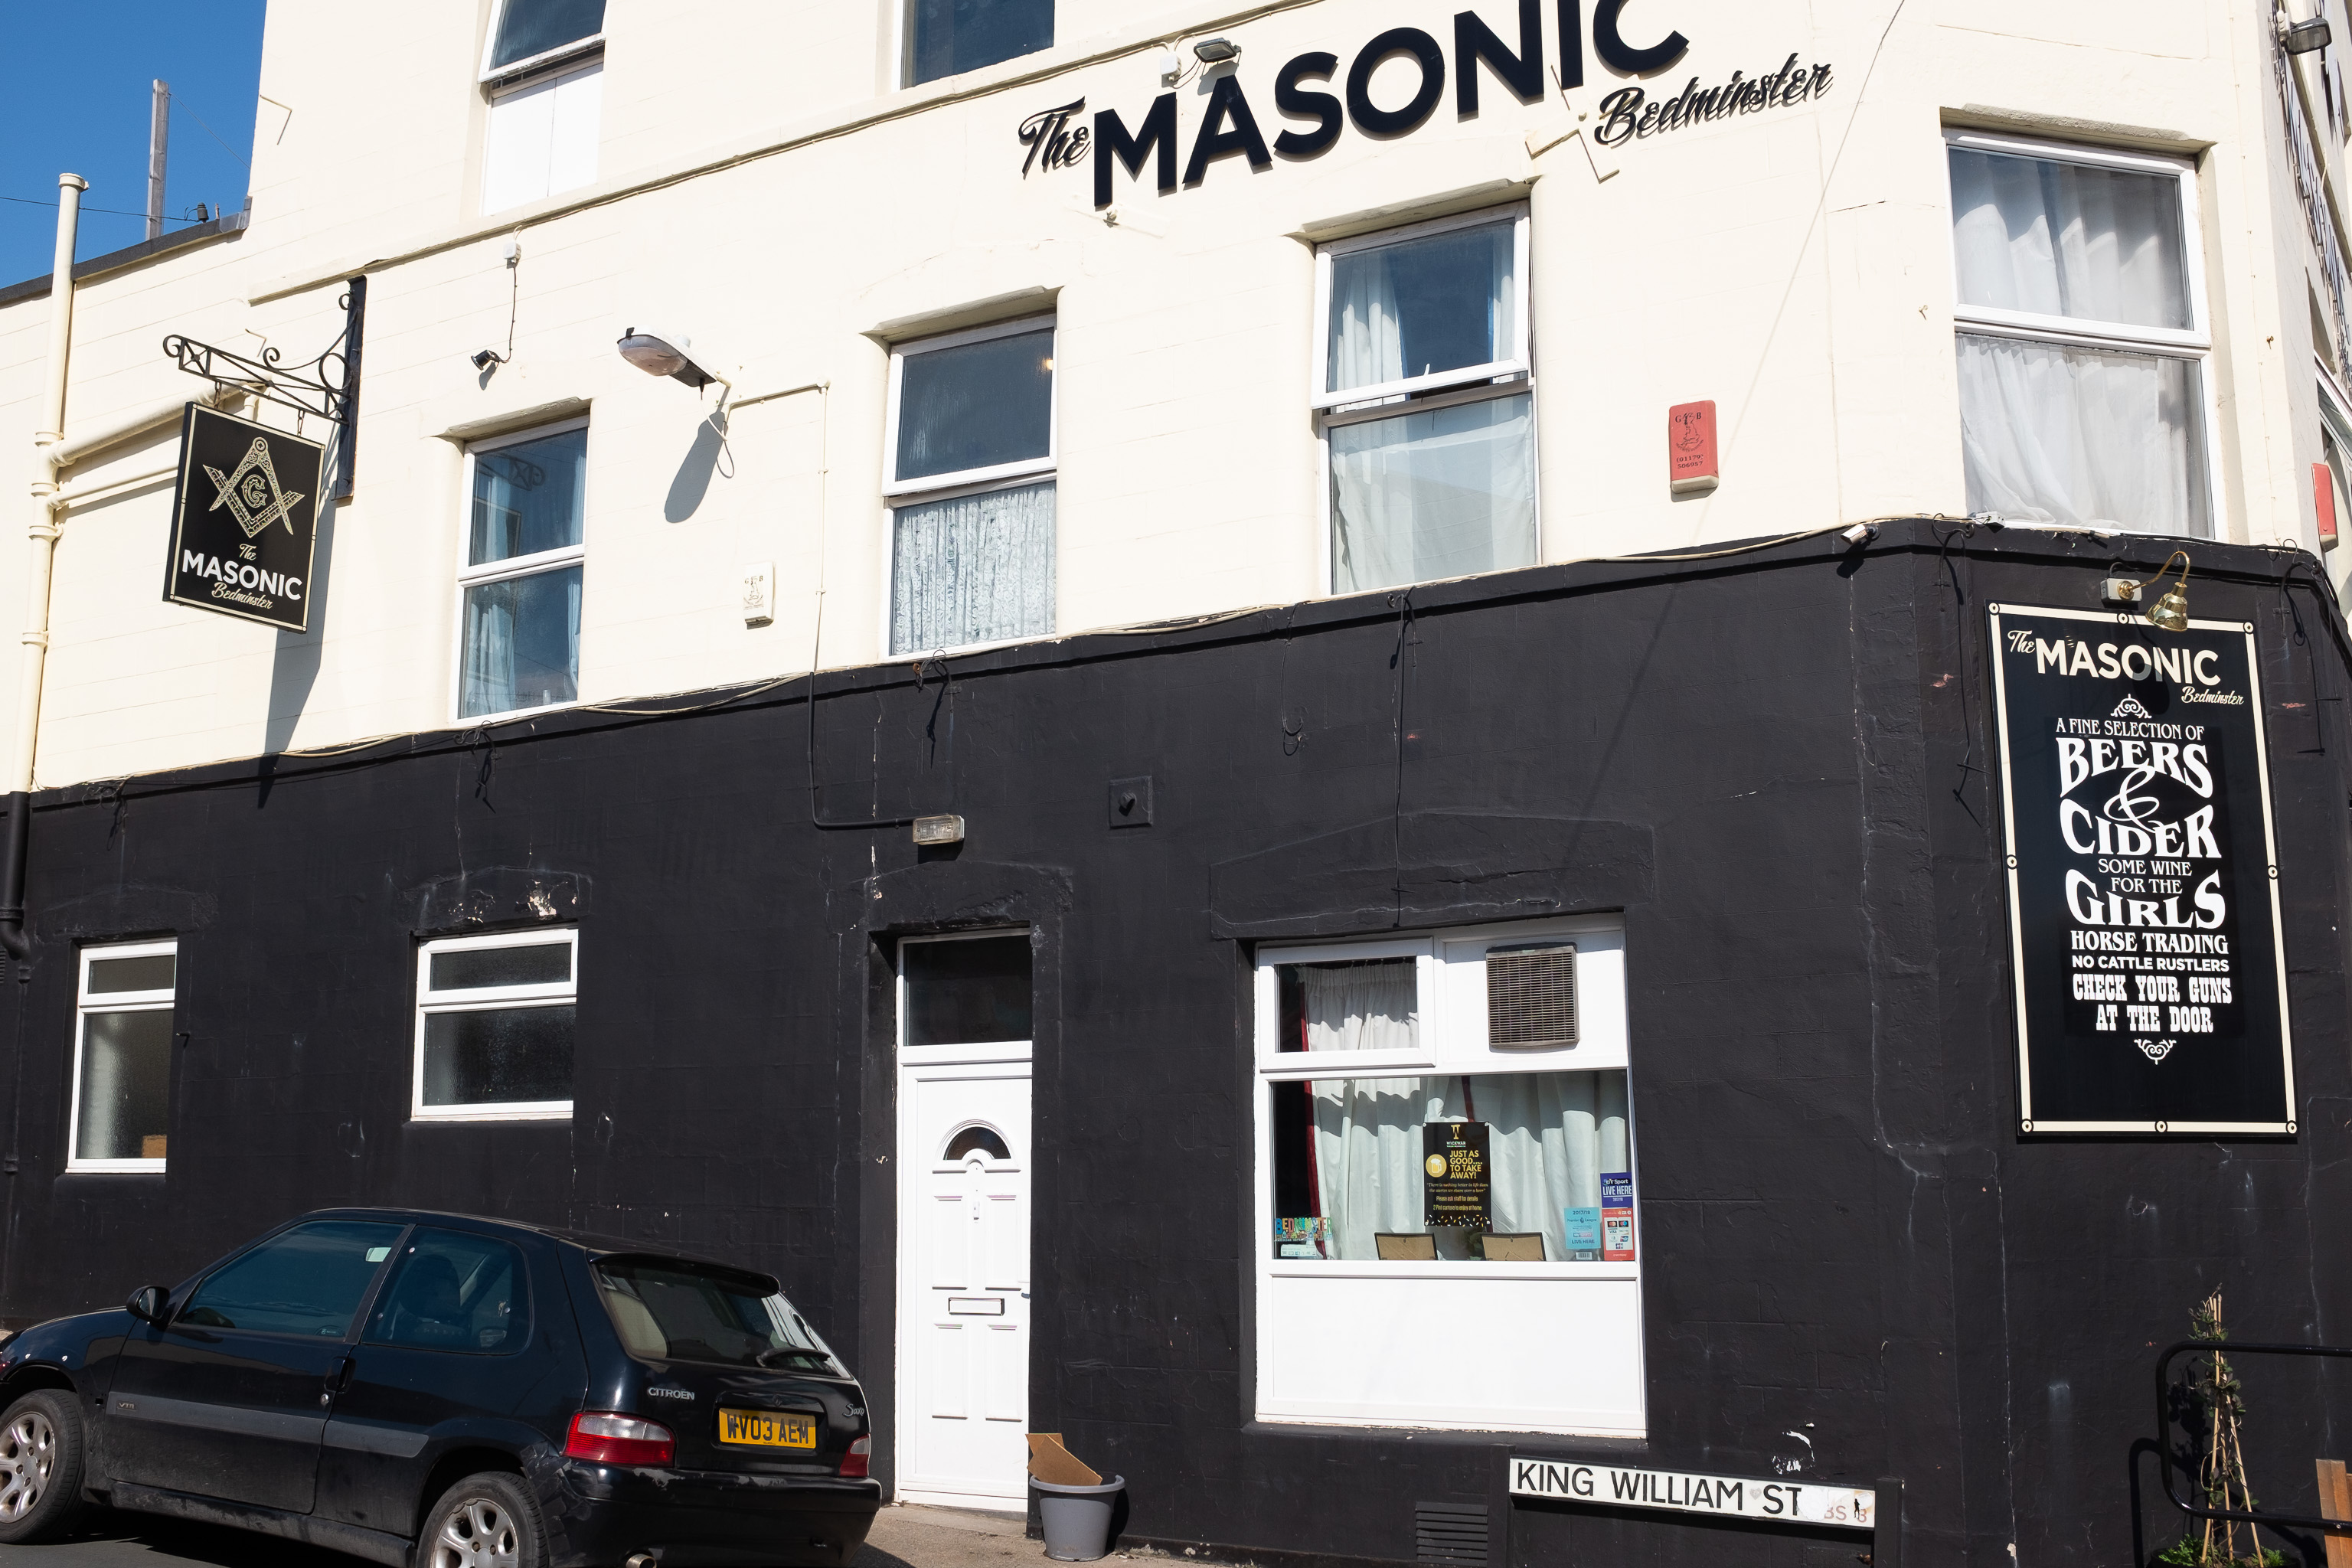 The Masonic
I love the Masonic's typography. Not been in myself, that I recall. I have the impression that it's more for locals than for visitors; more of a Me...